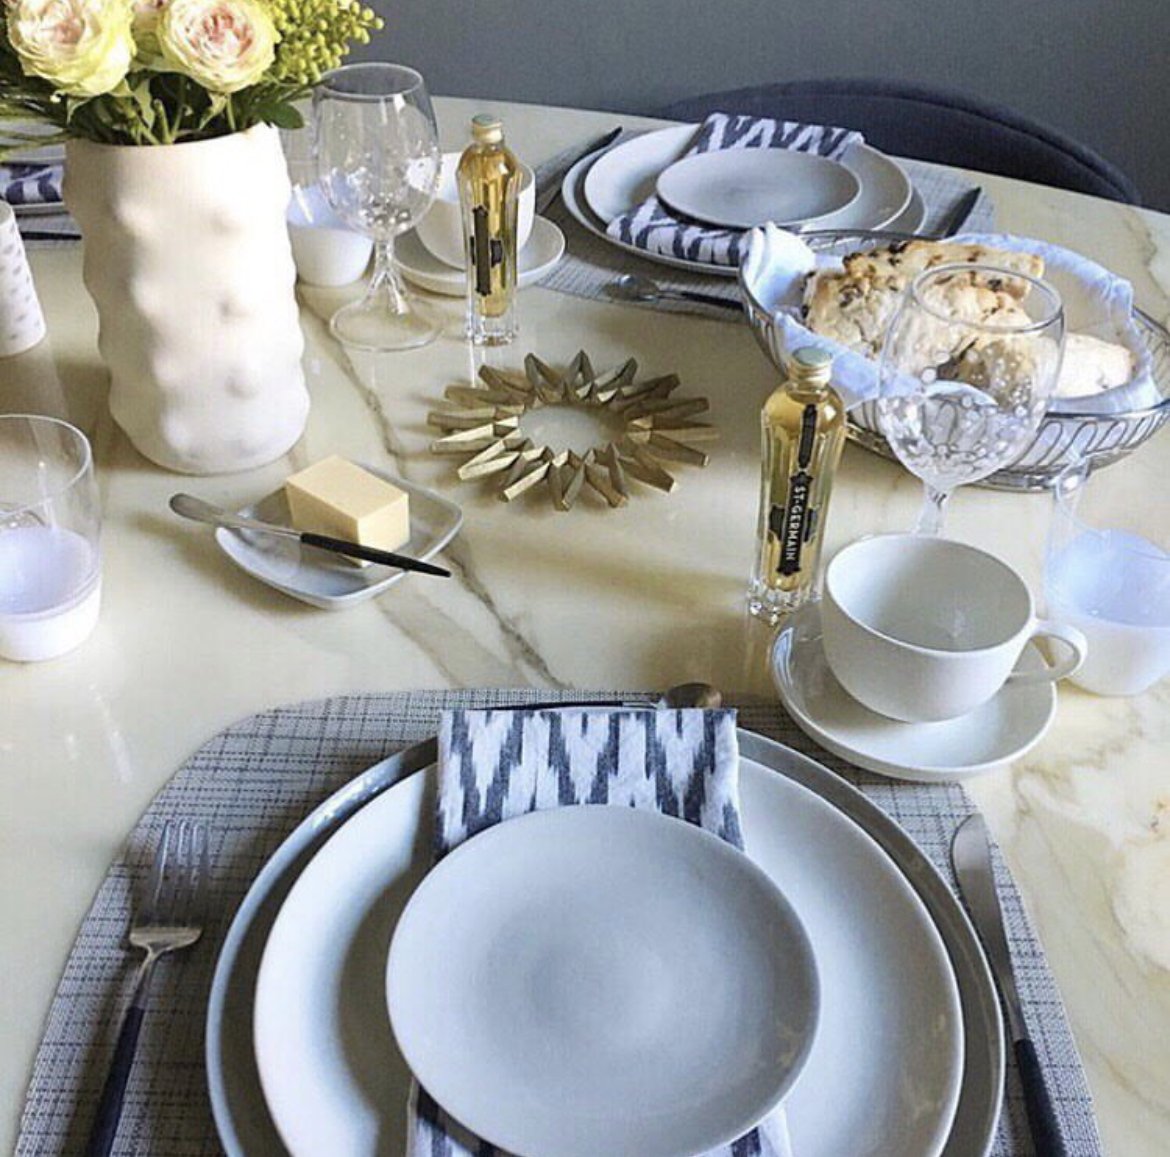 Our handcrafted cloth napkins are fancy and functional, making any dinner table feel extra special 📷 by @carlosays #homedecor #handmade #patterndesign #sustainabledesign #teatowel #artisanmade #designwithpurpose #ethicallymade #ethicallysourced #homedetails